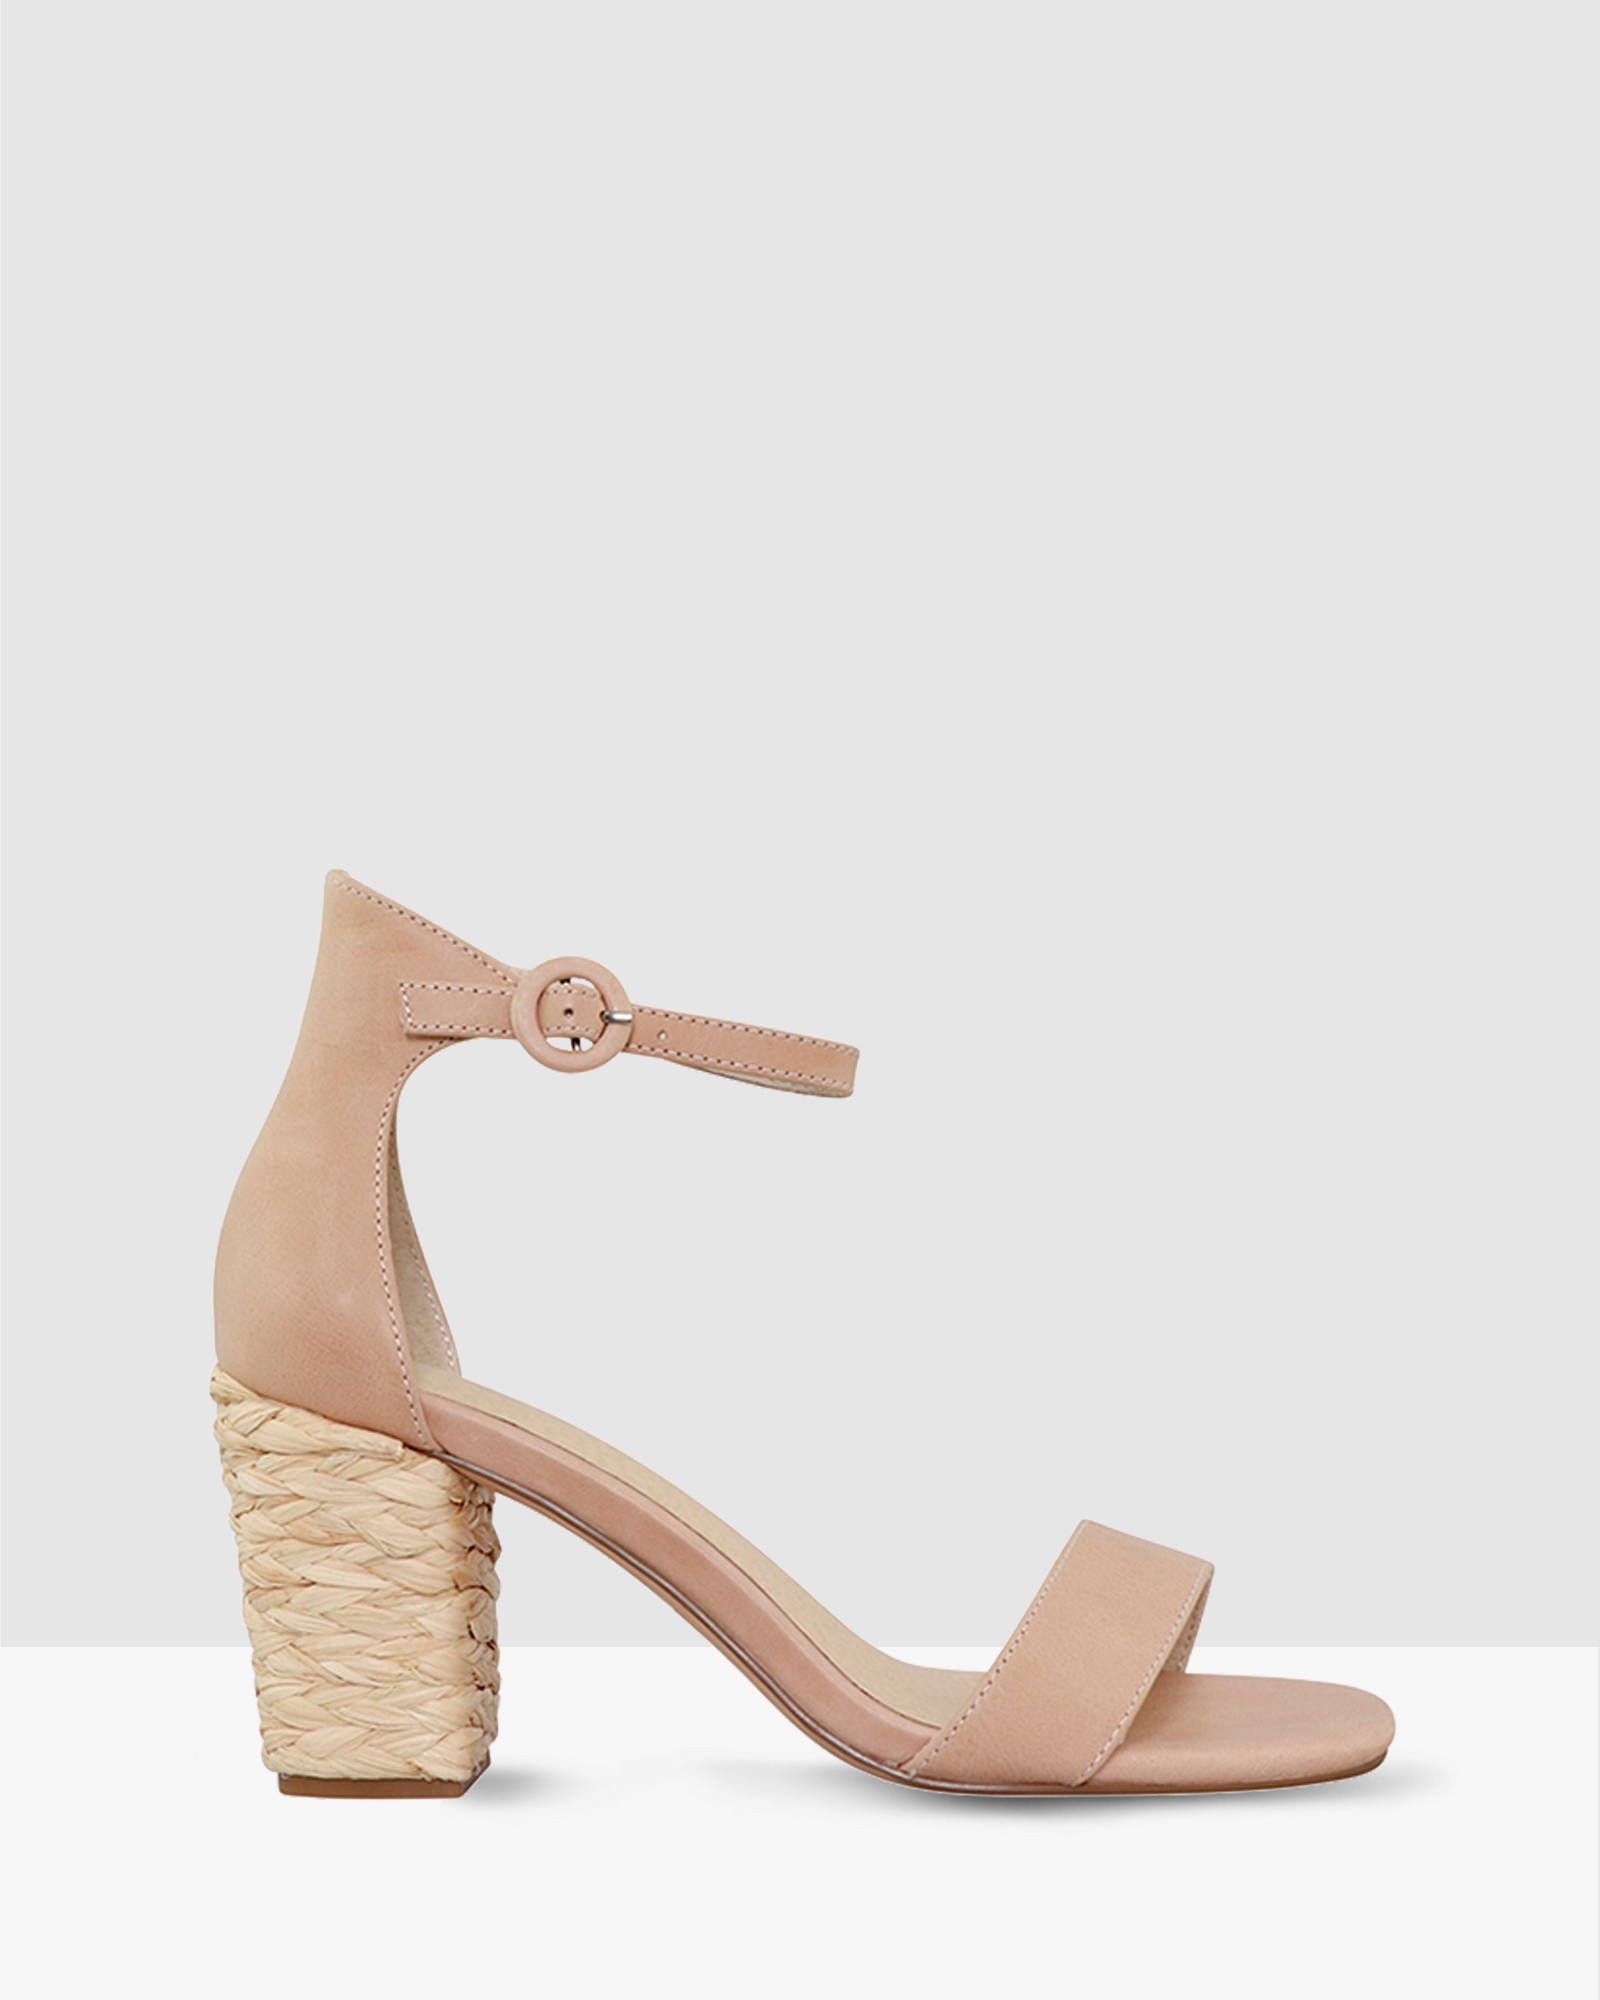 Silence NUDE1 by Nude | ShoeSales